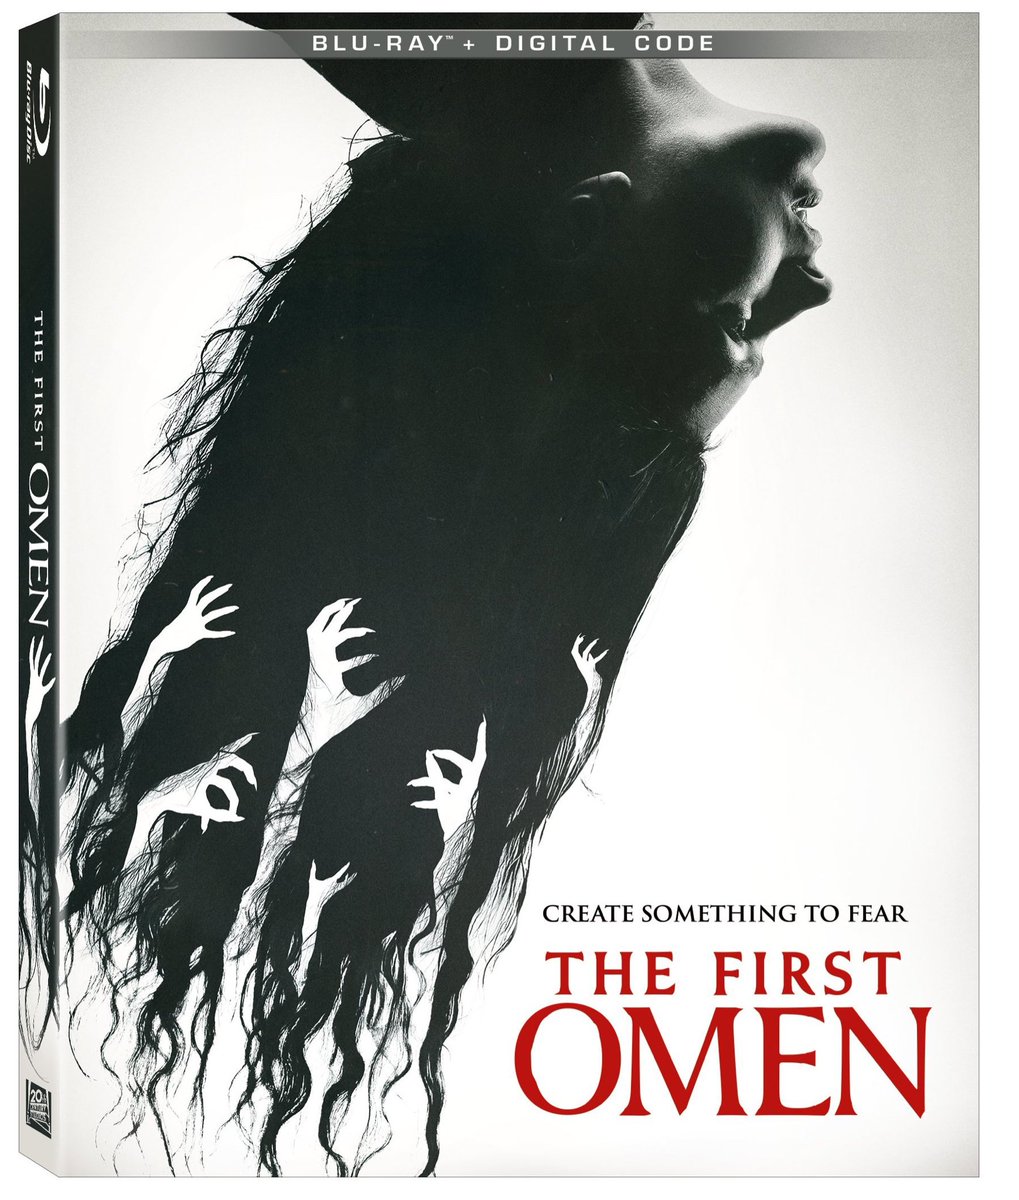 Coming to Blu-ray 7/30 

The First Omen (2024)

Bonus Features: 

‘The Mystery of Margaret’
‘The Director’s Vision’
‘Signs of the First Omen’

#FilmTwitter #Bluray #Horror #PhysicalMedia #TheFirstOmen #HorrorCommunity